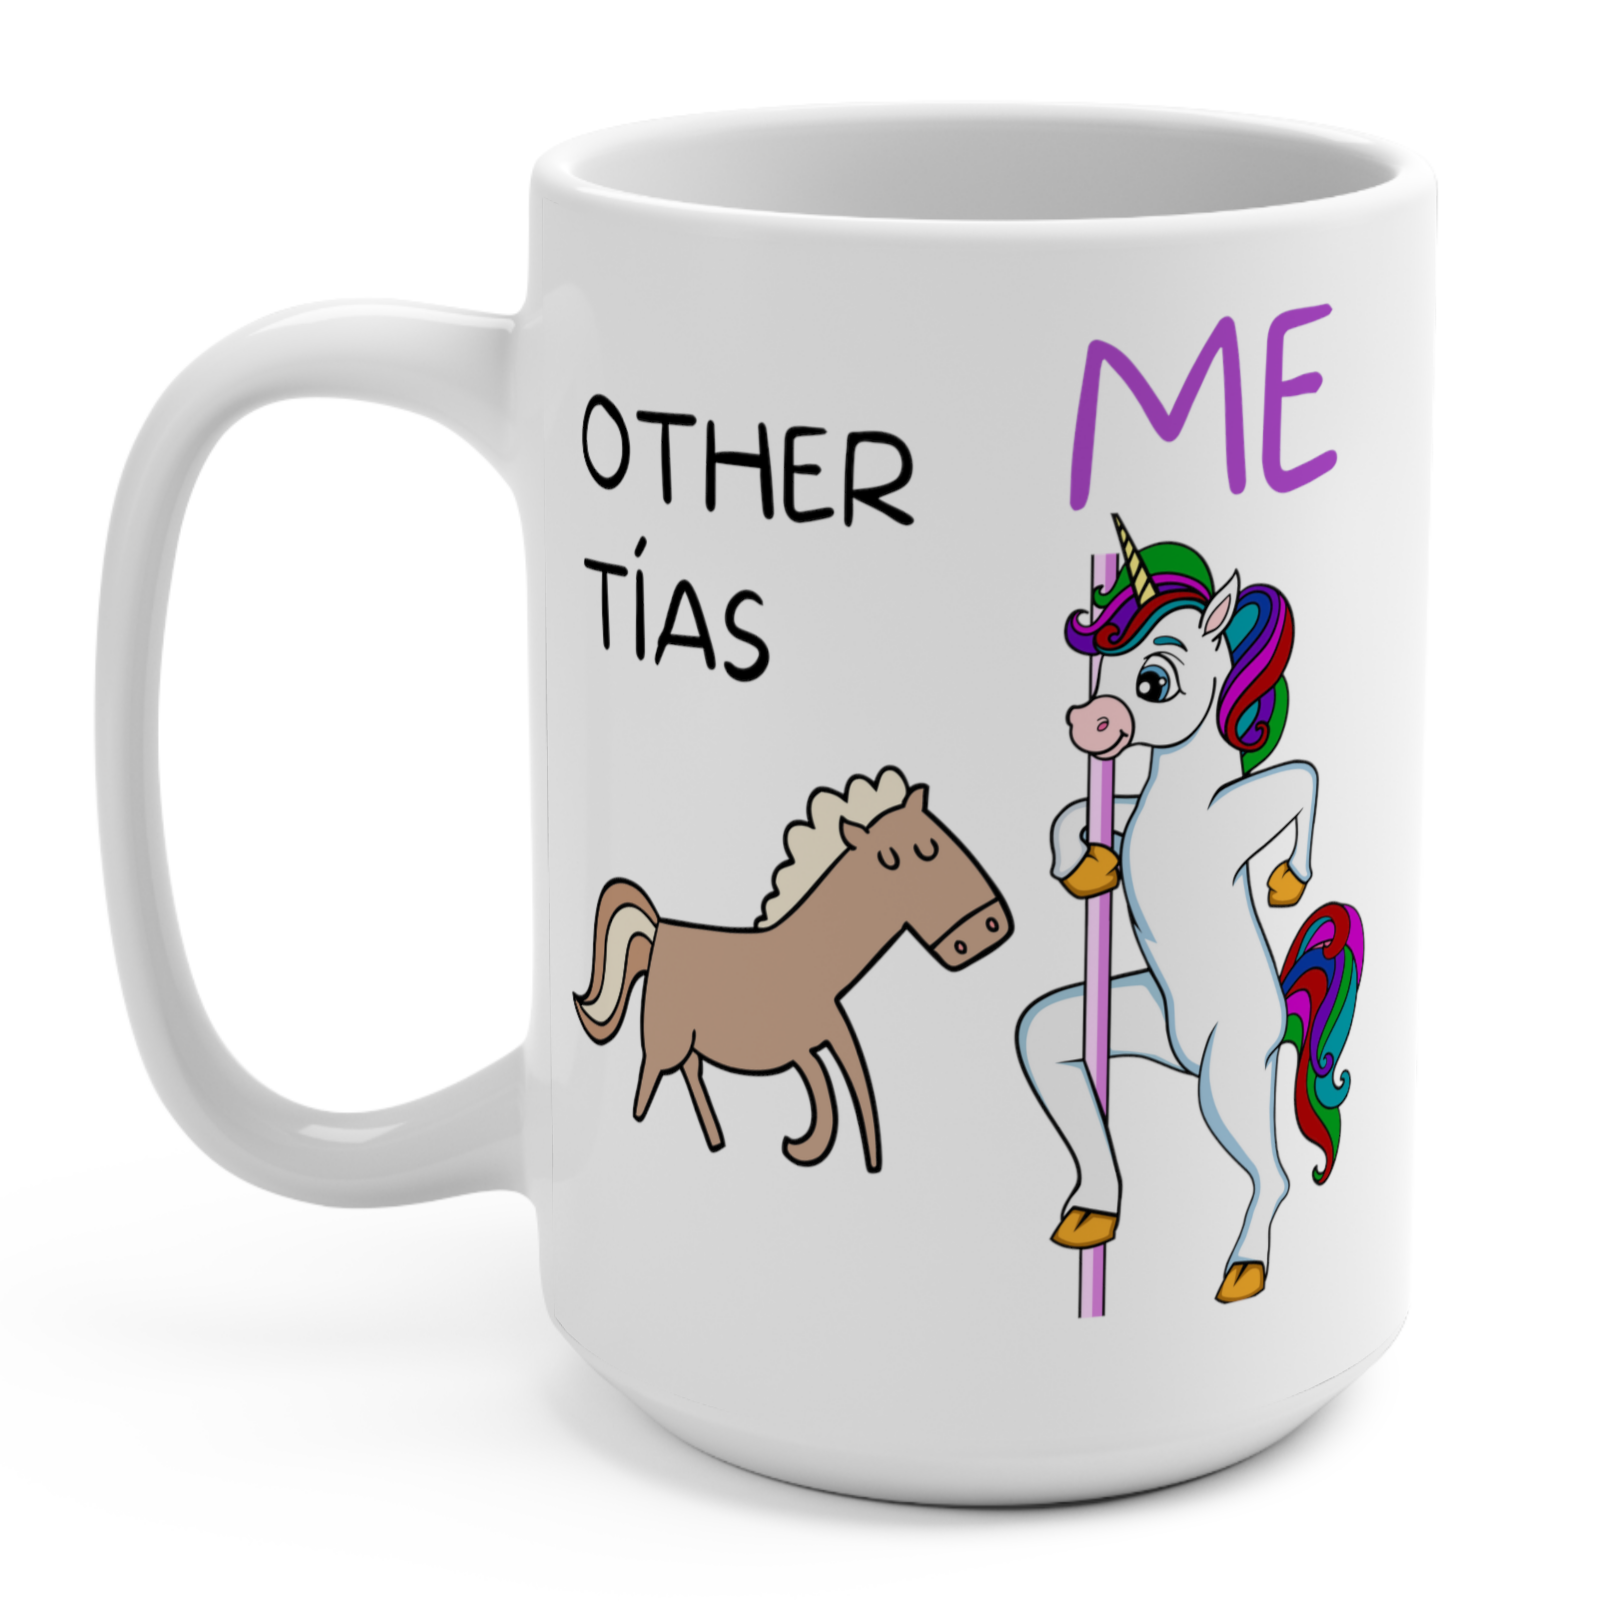 Funny tall white mug for Latinos and Spanish speakers.  The graphic shows a regular cartoon horse with the words "other tias" above it.  The other image is a colorful cartoon unicorn on a stripper pole with the word "me" above it.